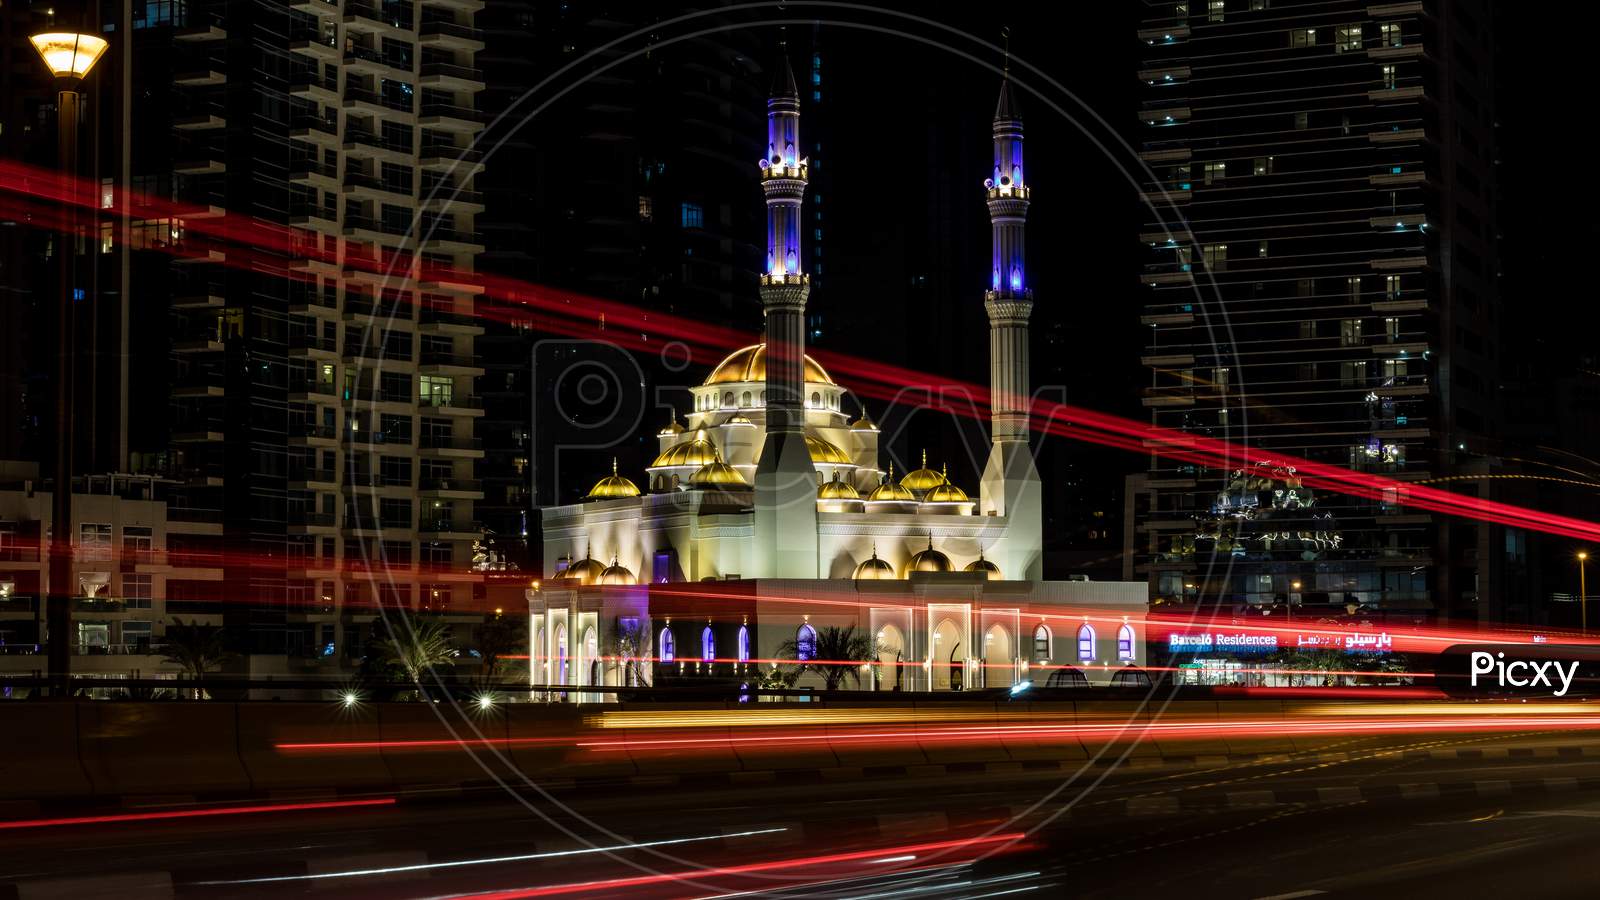 Sharjah New Mosque Largest Mosque In Dubai Traditional Islamic Architecture